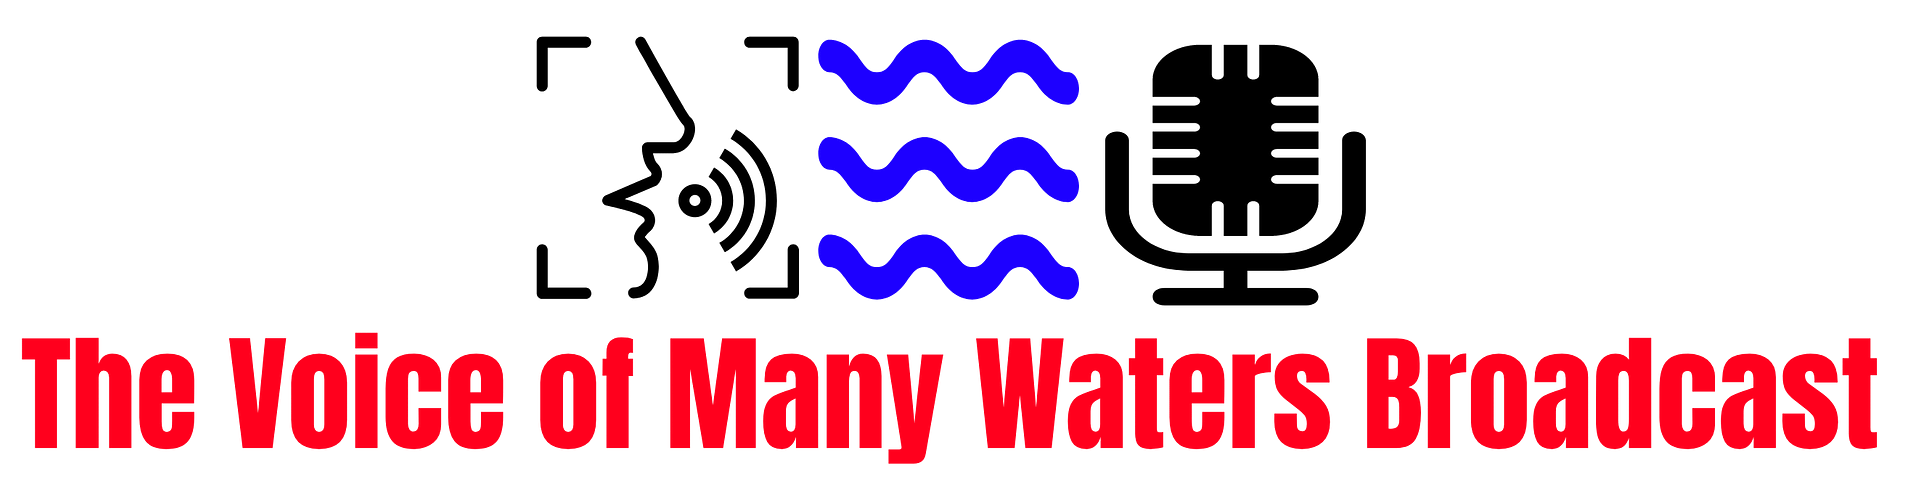 The Voice of many Waters Broadcast